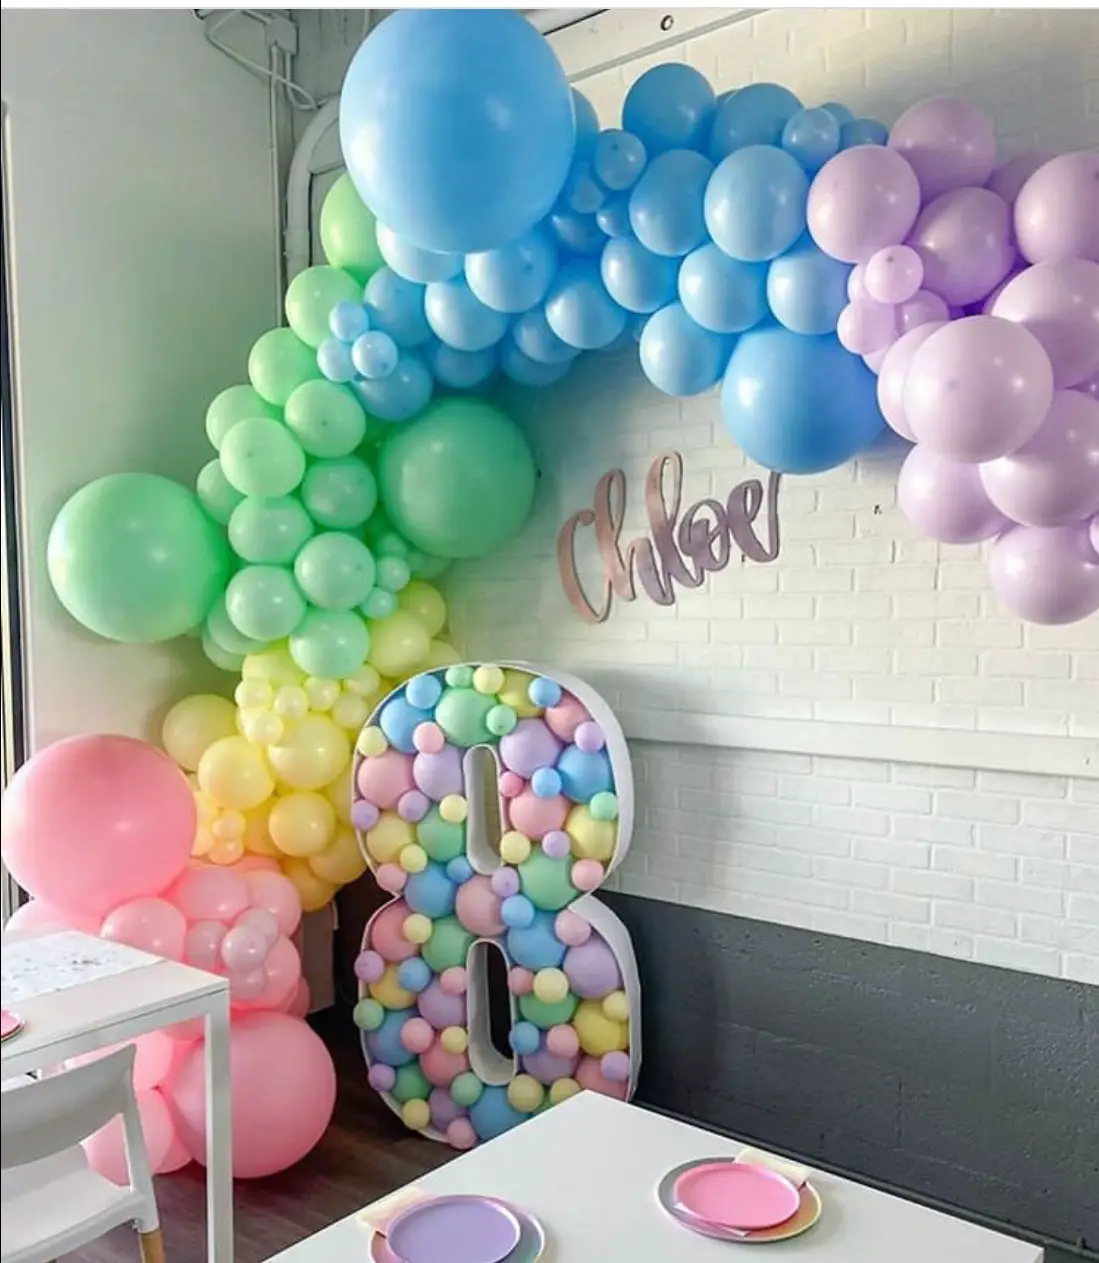 20+ Beautiful Balloon Decor Ideas For Any Occasion - The Wonder Cottage